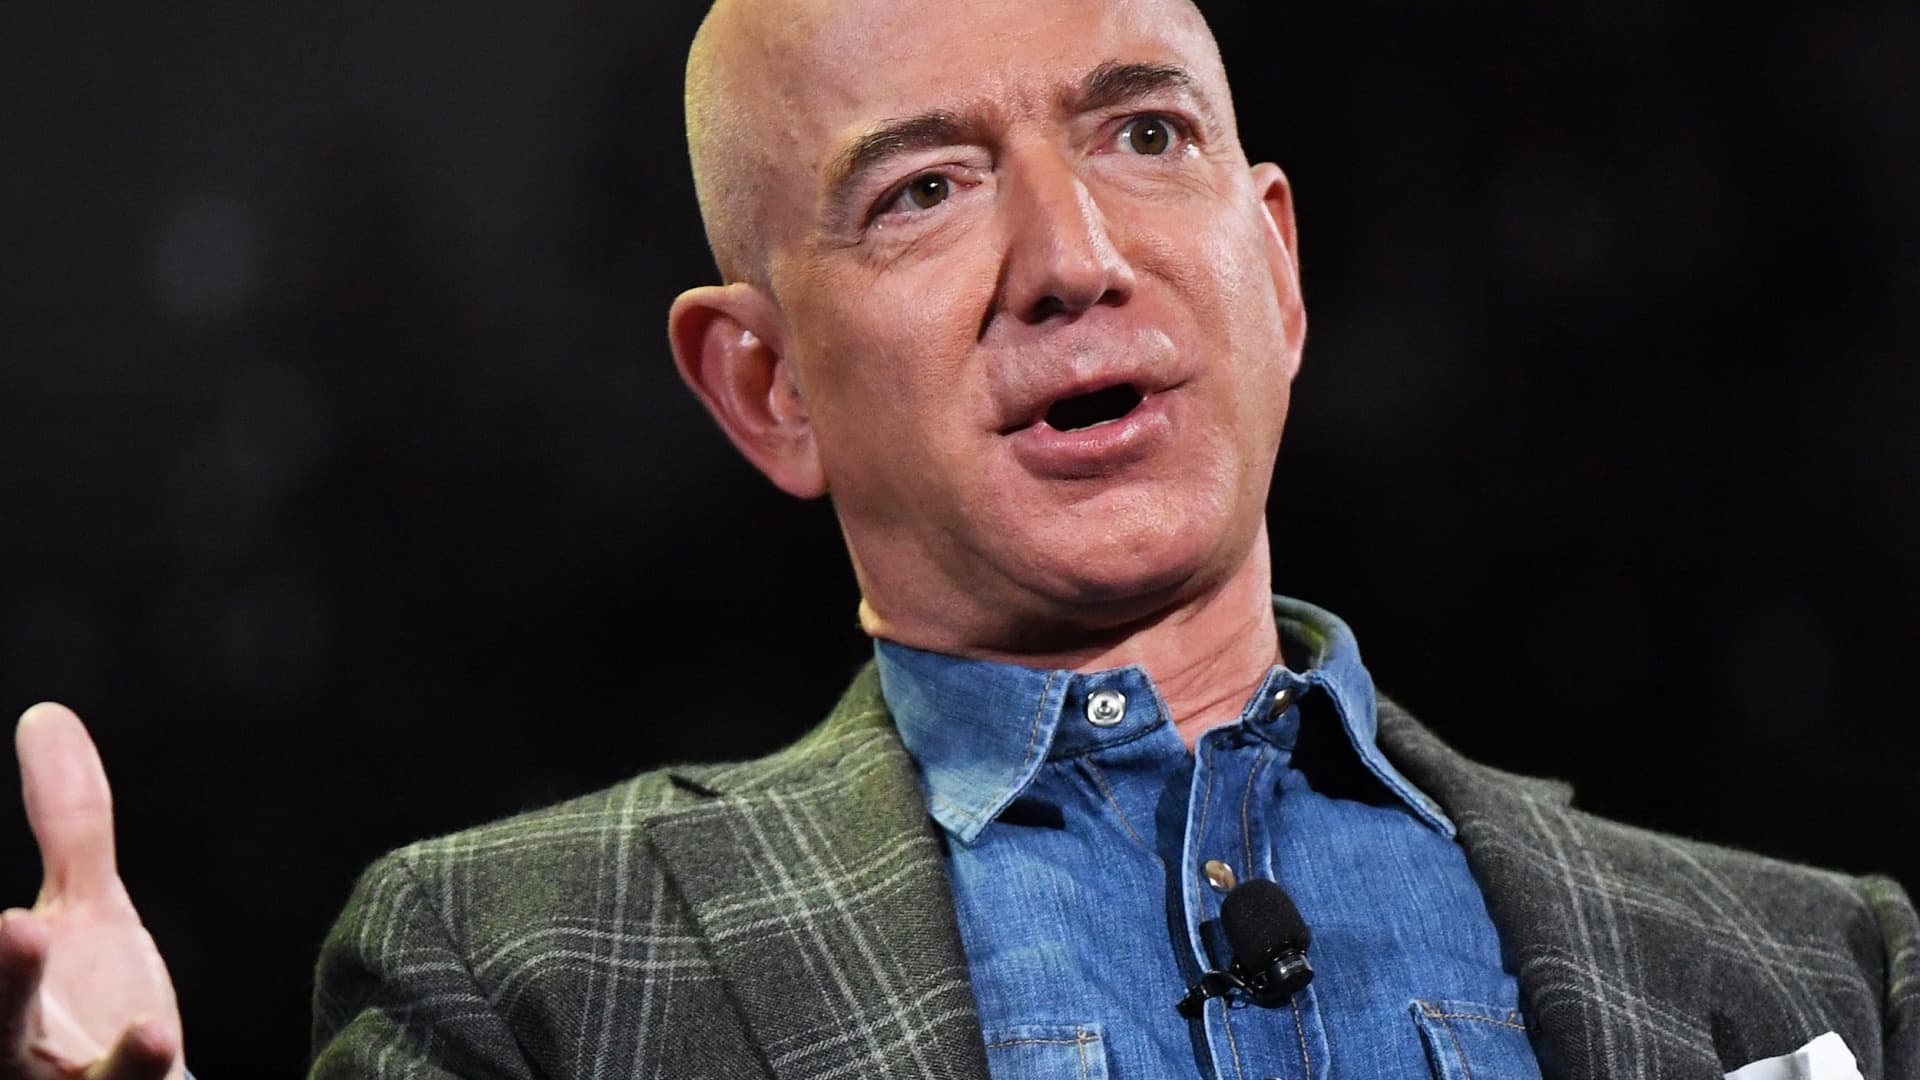 Jeff Bezos responds to Amazon customer who was angry over Black Lives Matter message: 'My stance won't change'